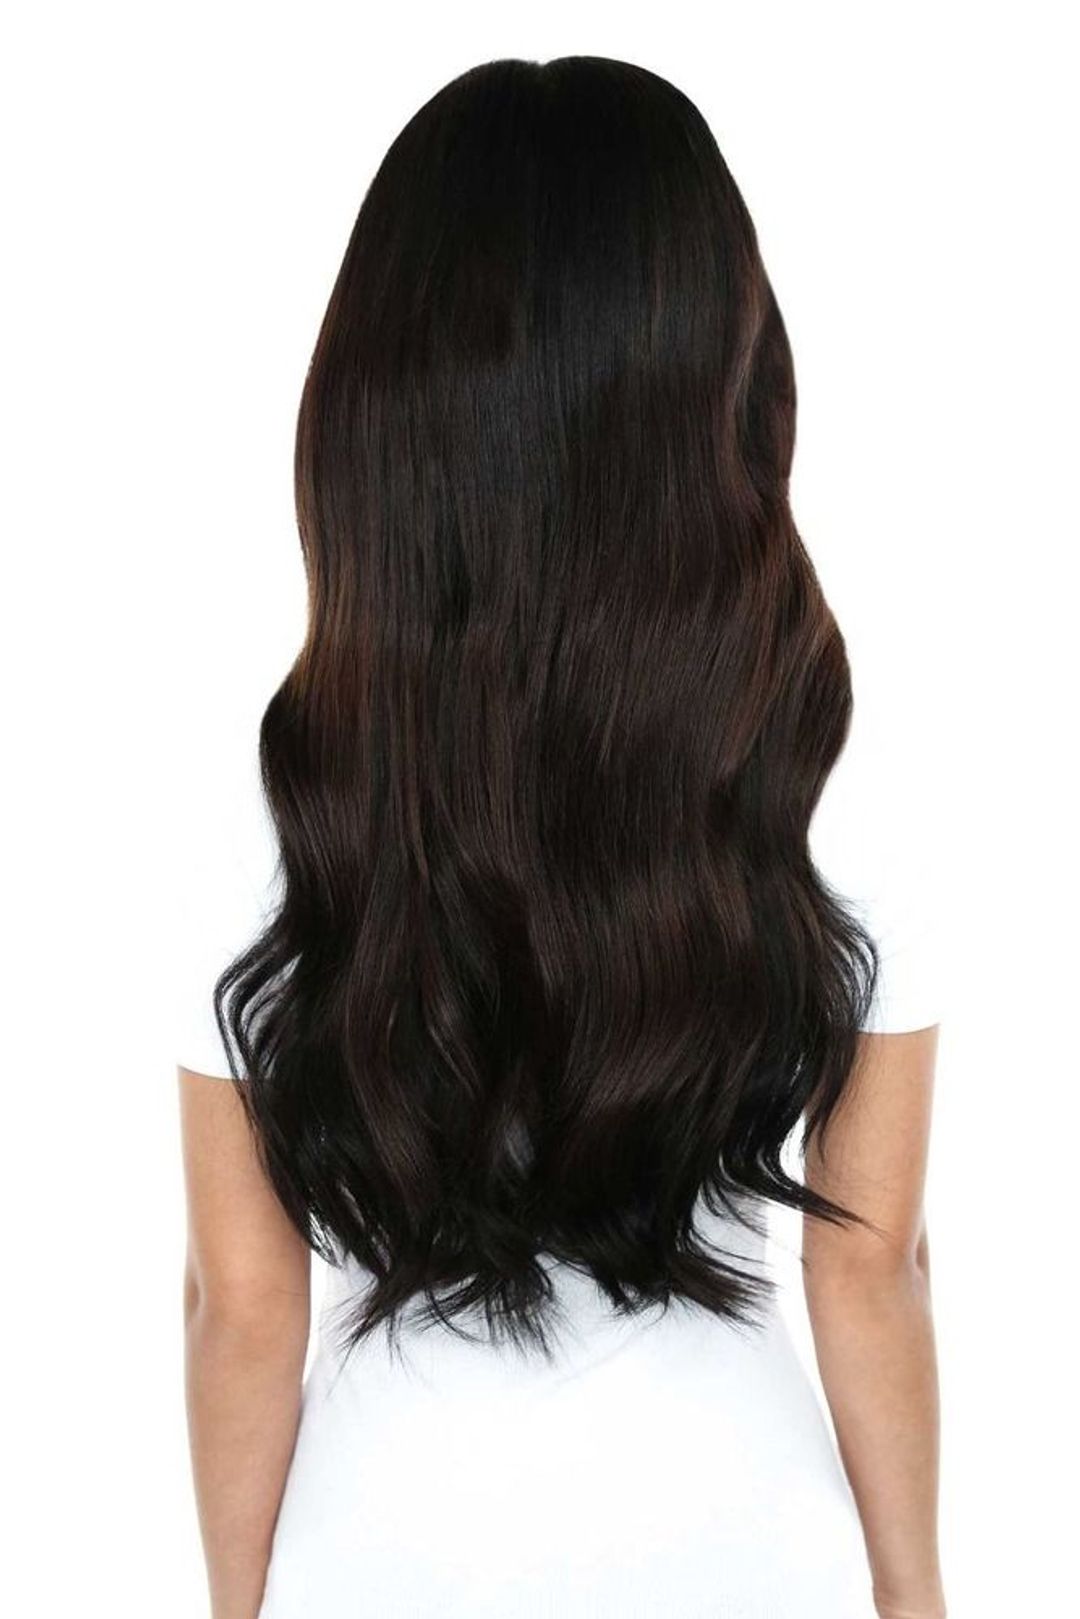 Beauty Works Gold Double Weft Extensions - Ashed Brown,20"